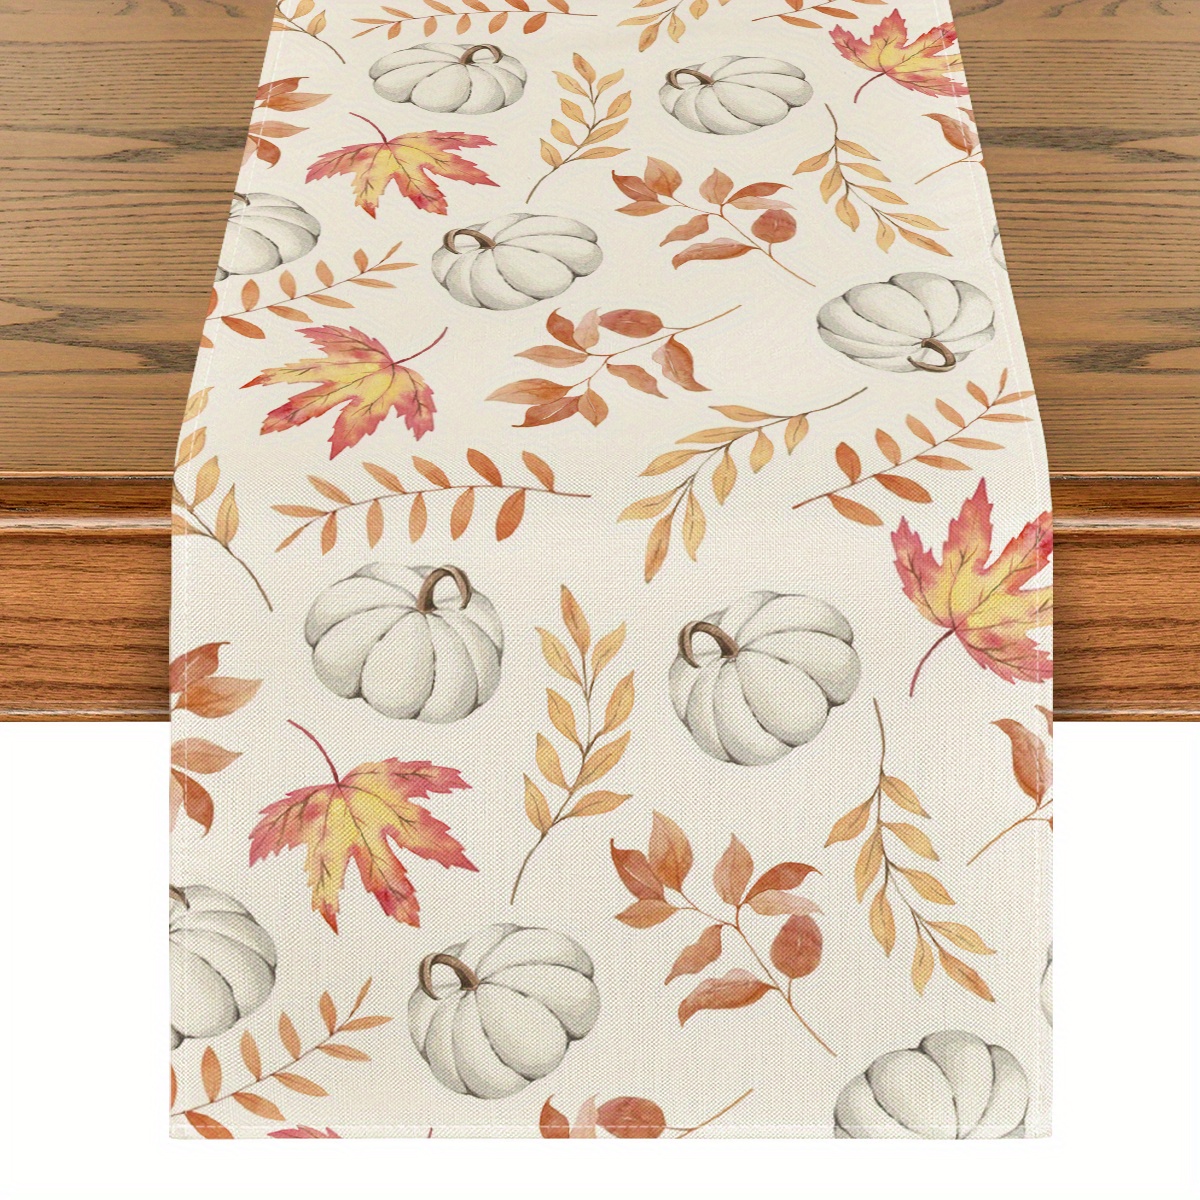 

Sm:)e Orange Pumpkins Fall Maple Leaves Fall 1pc Table Runner 13x72 Inch And 4pc Place Mats 12x18 Inch, Seasonal Autumn Kitchen Dining Table Funky Home Decoration For Home Party Funky Home Decor